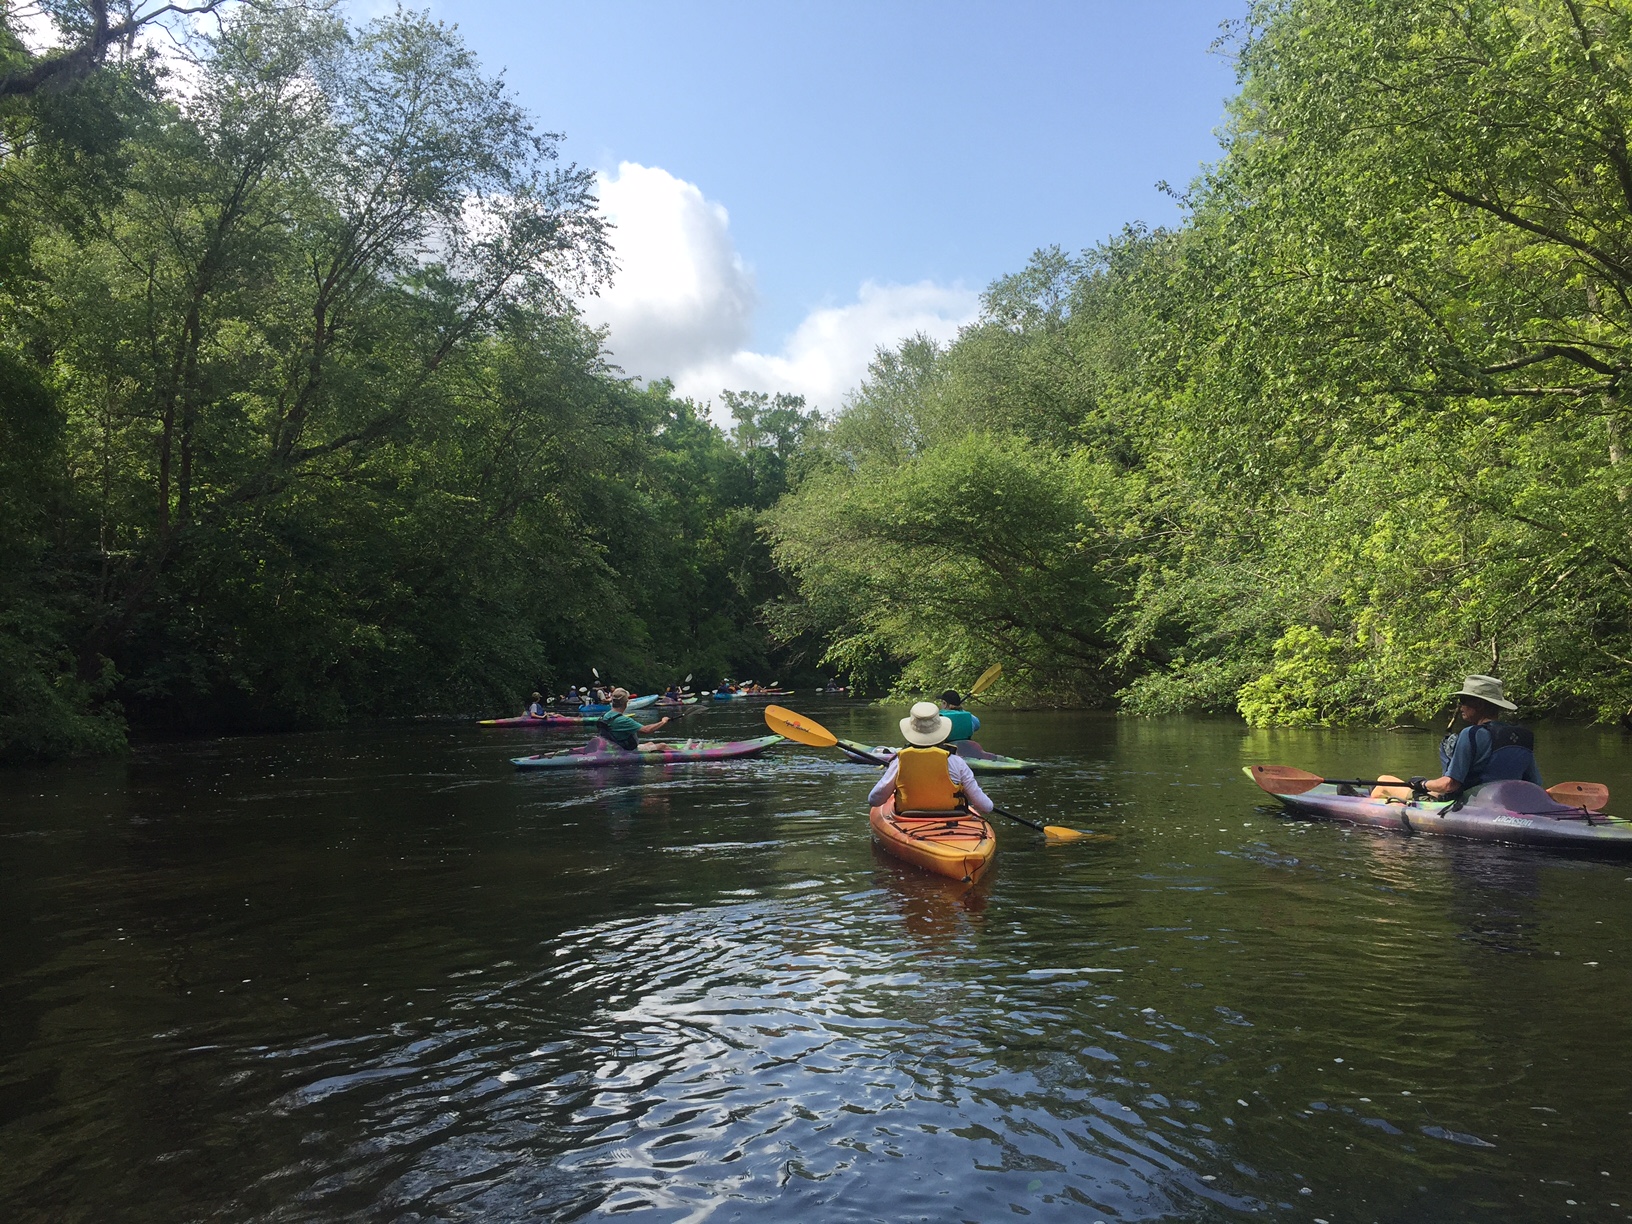 Sold Out! Black River Cypress Preserve Paddle - Saturday, May 15, 2021